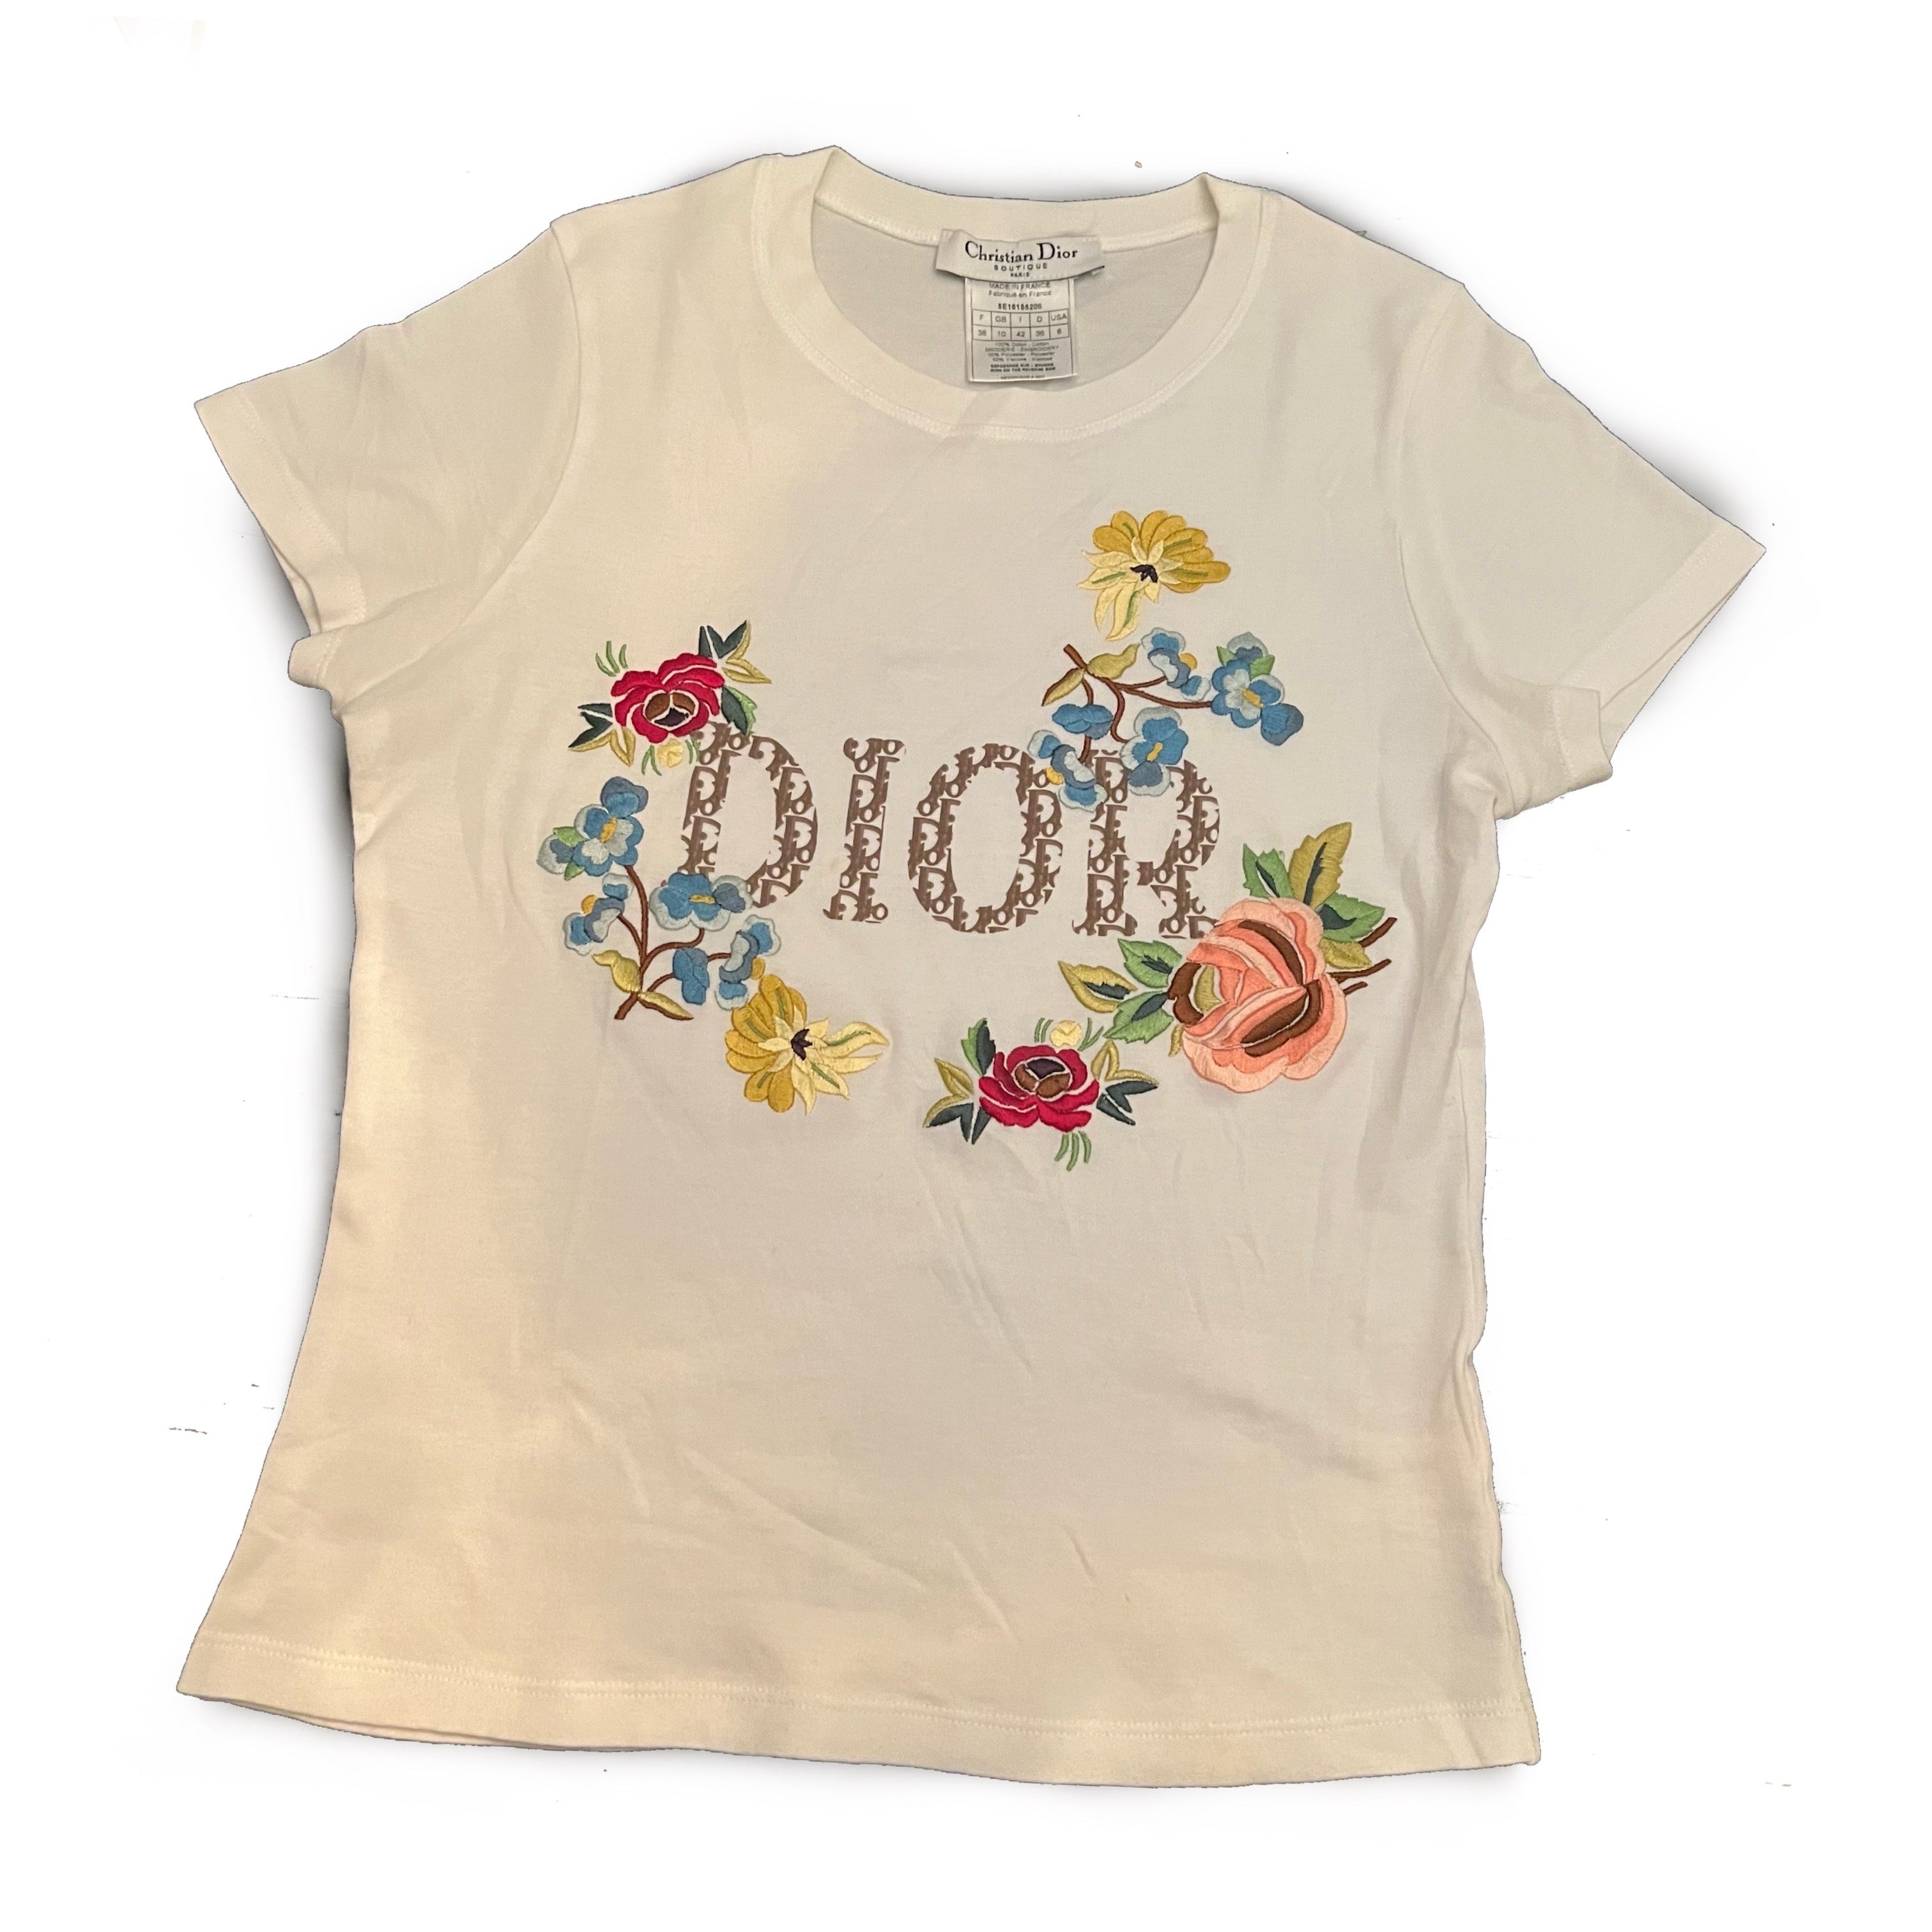 00's Christian Dior Flower Embroidered Tee – Riddle Me This Vintage